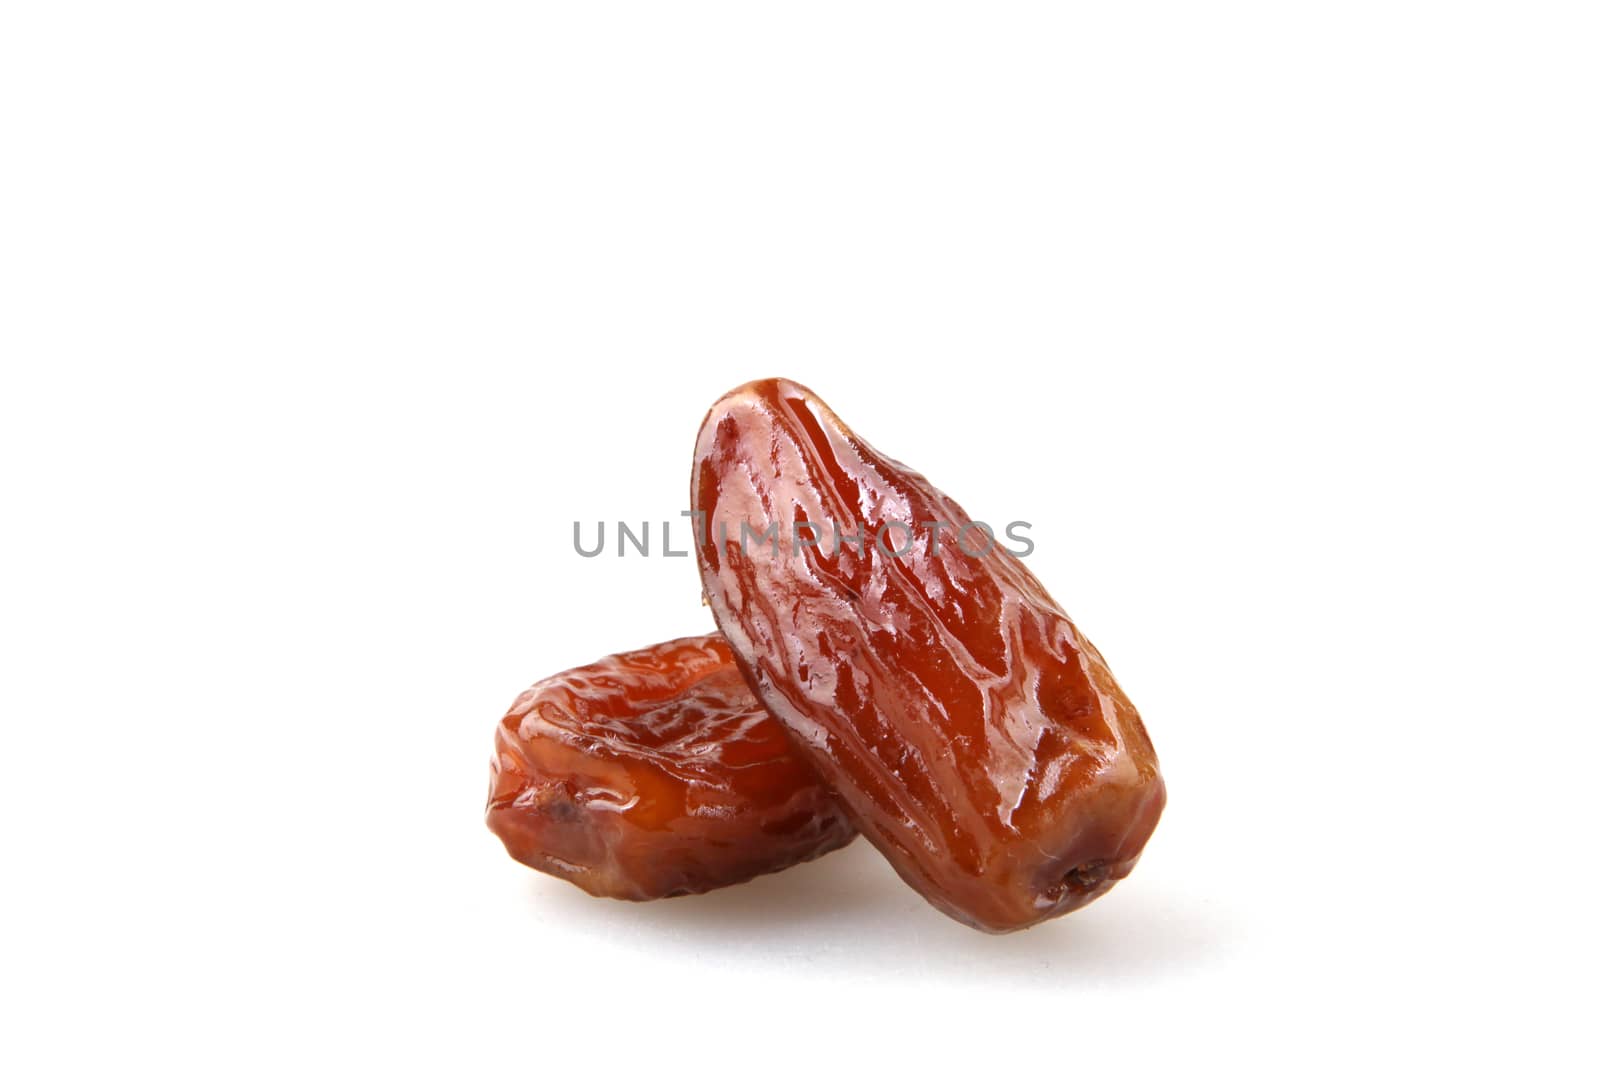 Date Fruit On A White Background by nenovbrothers